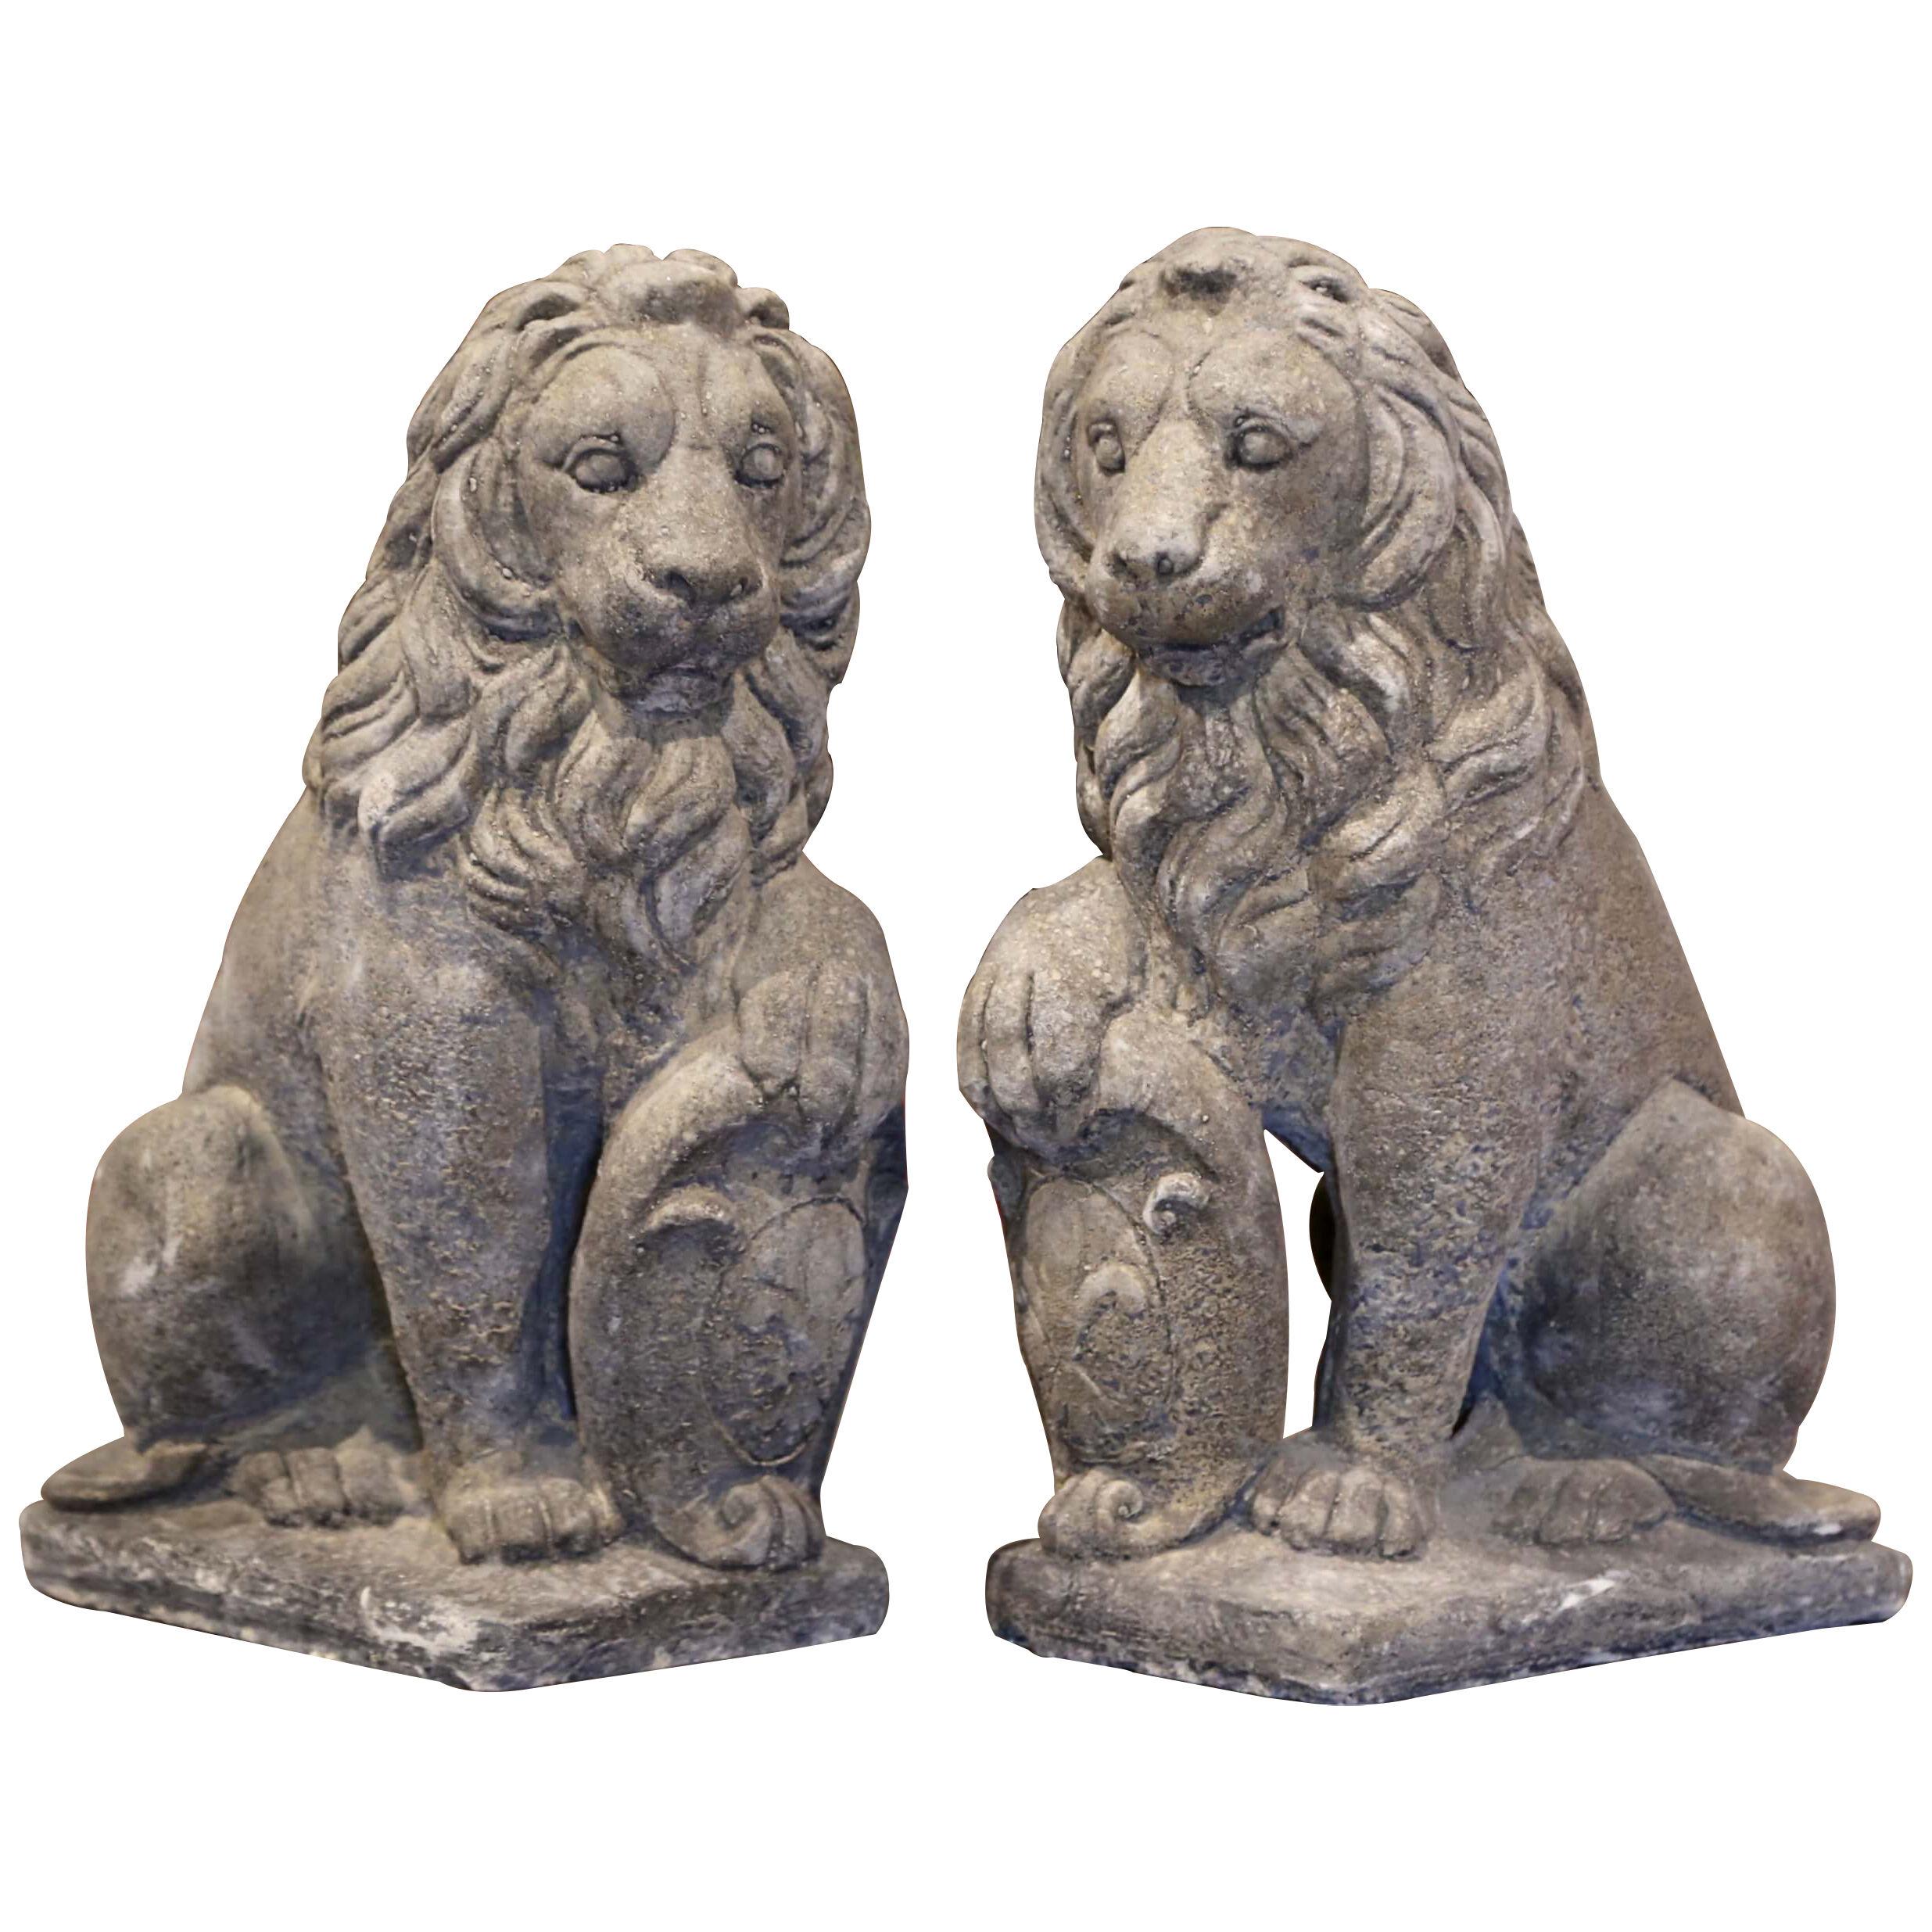 Pair of French Carved Stone Heraldic Lions Sculptures Garden Statuary